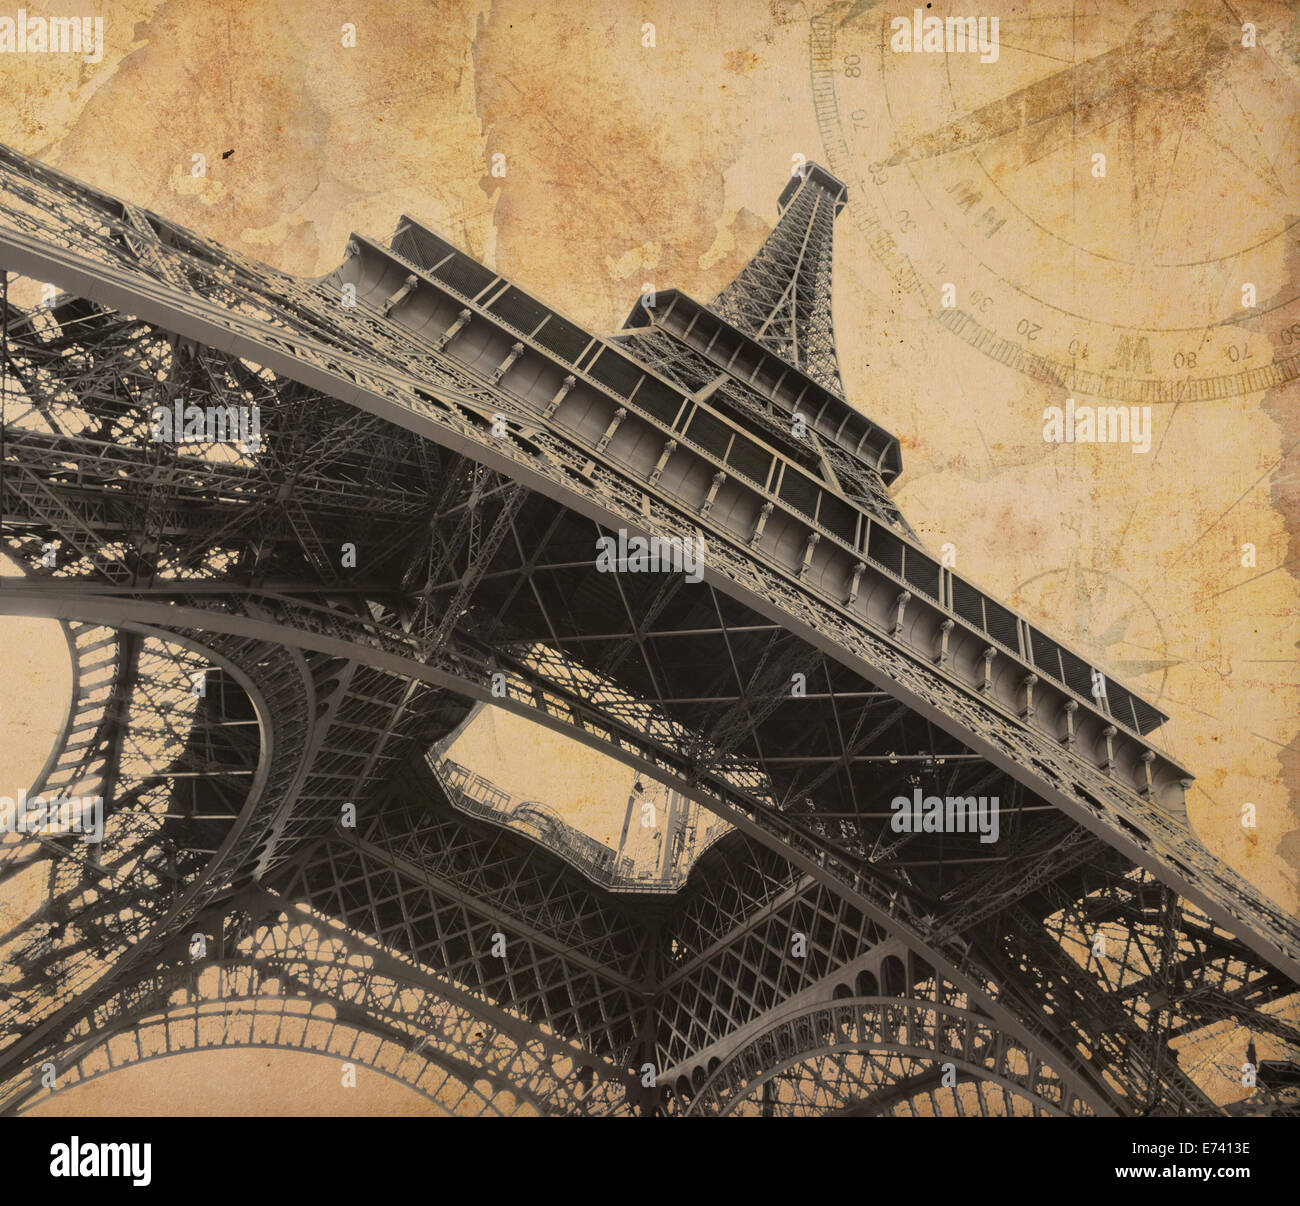 Eiffel tower over old adventure map Stock Photo